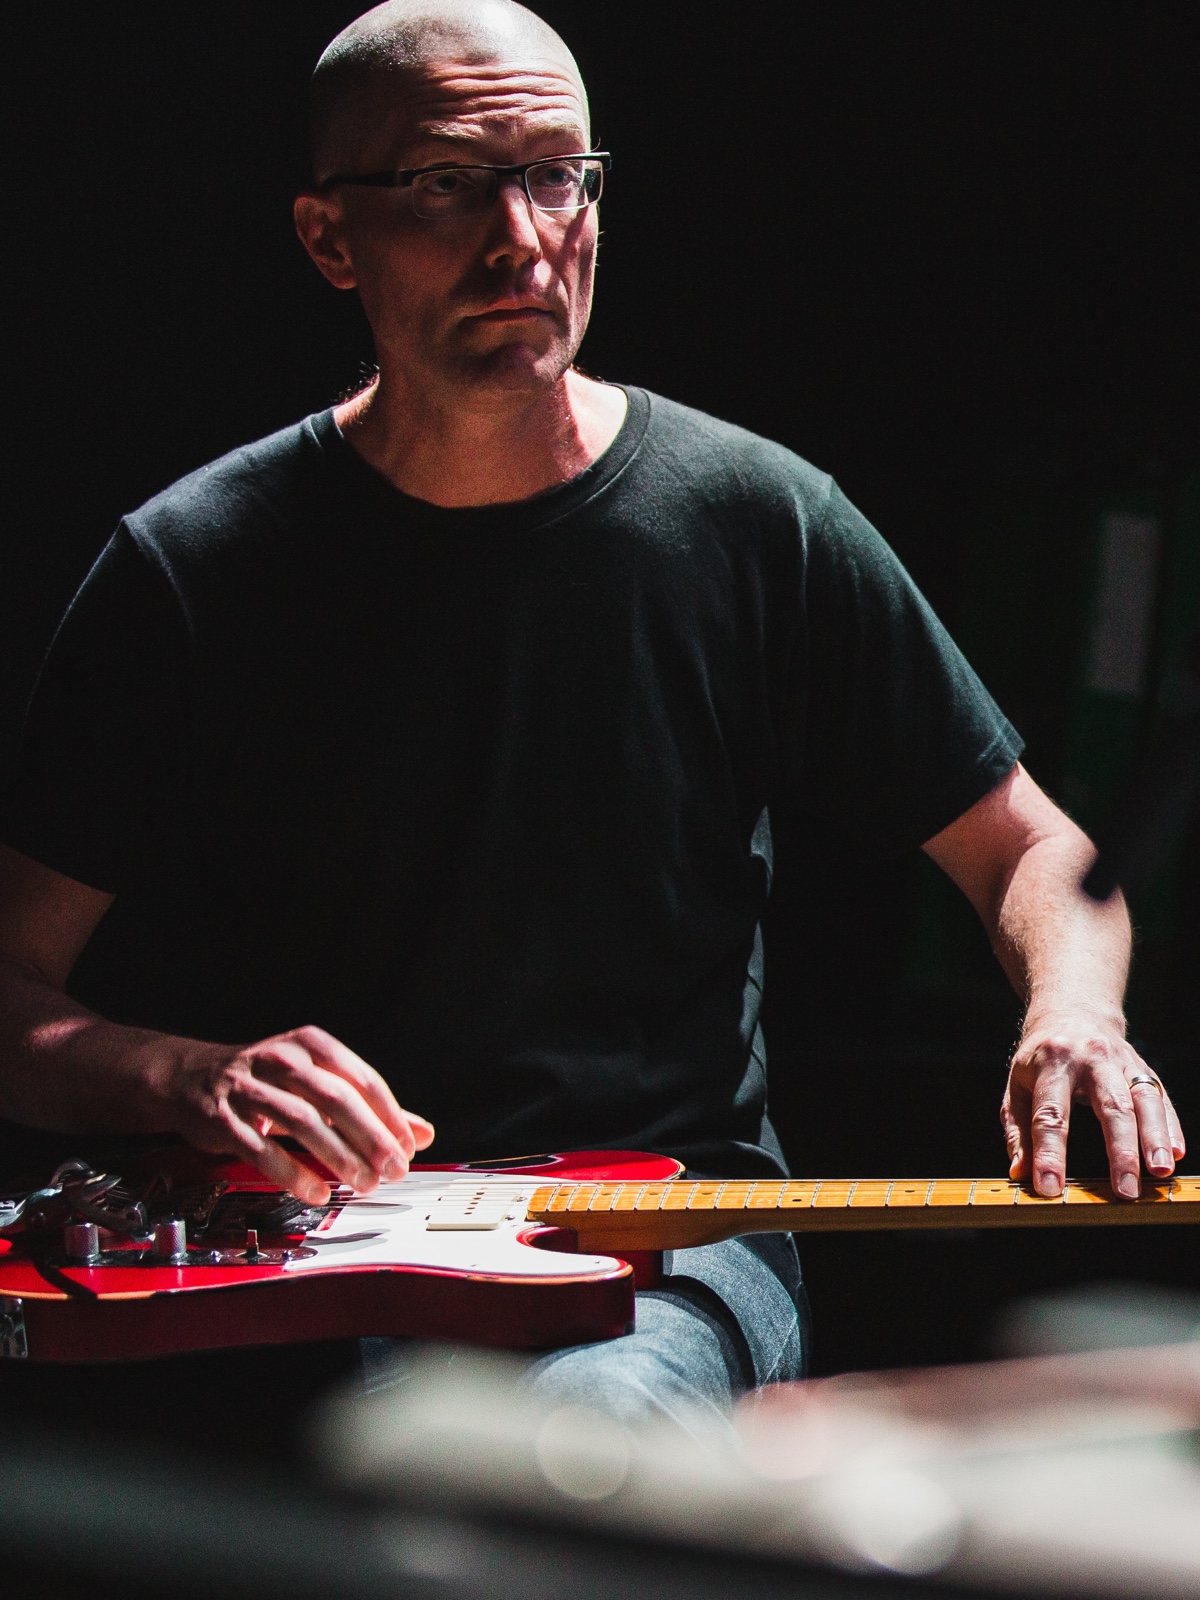 Christopher Burns playing electric guitar, photographed by Ben Semisch